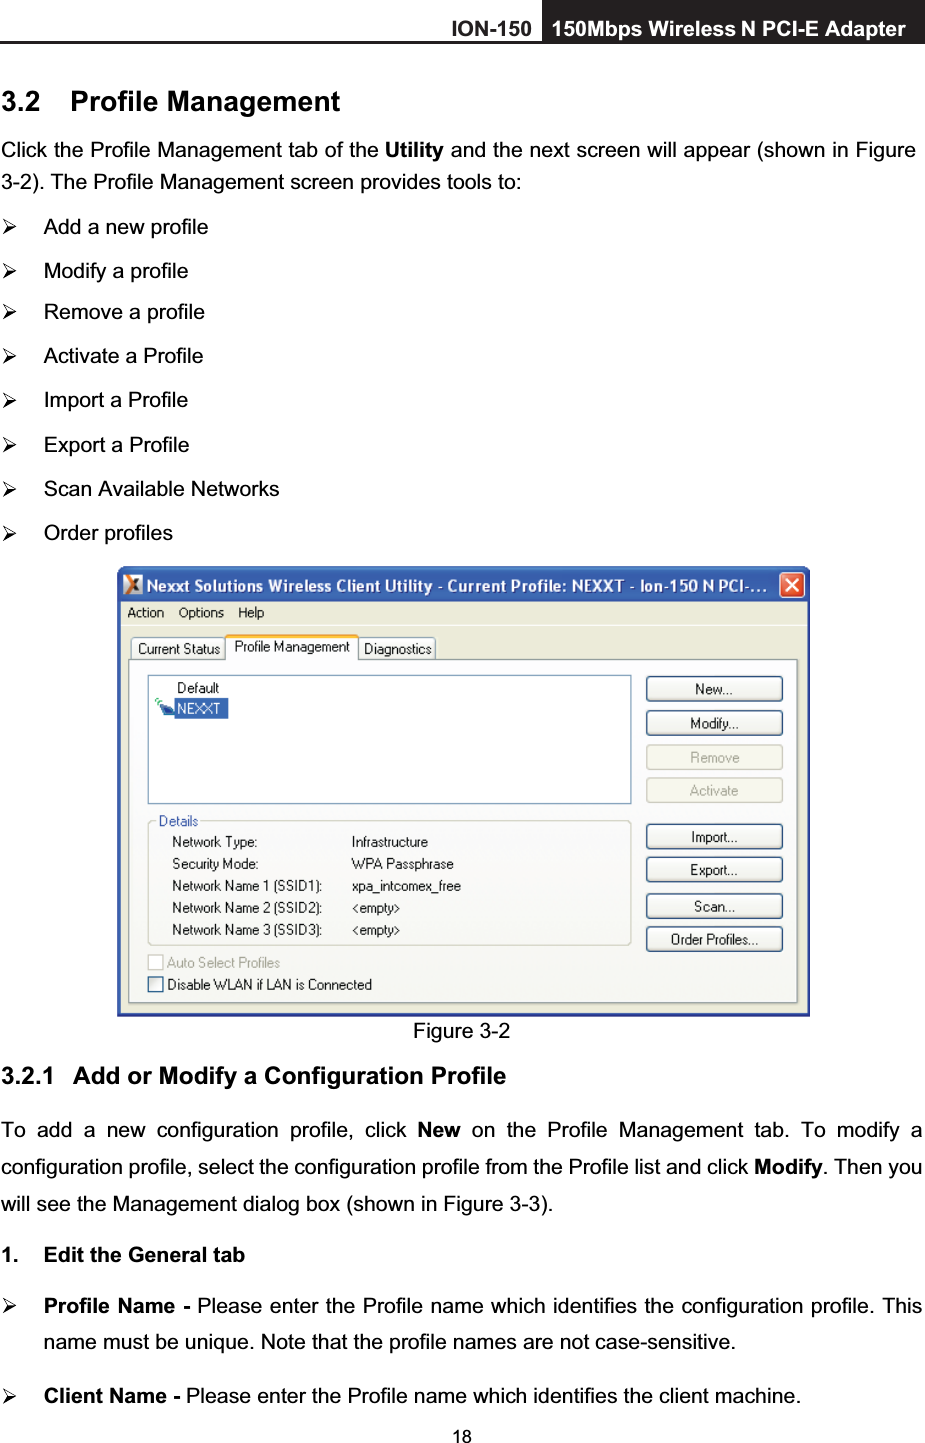 183.2 Profile Management Click the Profile Management tab of the Utility and the next screen will appear (shown in Figure 3-2). The Profile Management screen provides tools to:   Add a new profile   Modify a profile   Remove a profile   Activate a Profile   Import a Profile   Export a Profile  Scan Available Networks  Order profiles Figure 3-2 3.2.1 Add or Modify a Configuration Profile To add a new configuration profile, click New on the Profile Management tab. To modify a configuration profile, select the configuration profile from the Profile list and click Modify. Then you will see the Management dialog box (shown in Figure 3-3).1.  Edit the General tab Profile Name - Please enter the Profile name which identifies the configuration profile. This name must be unique. Note that the profile names are not case-sensitive. Client Name - Please enter the Profile name which identifies the client machine. ION-150 150Mbps Wireless  N PCI-E Adapter